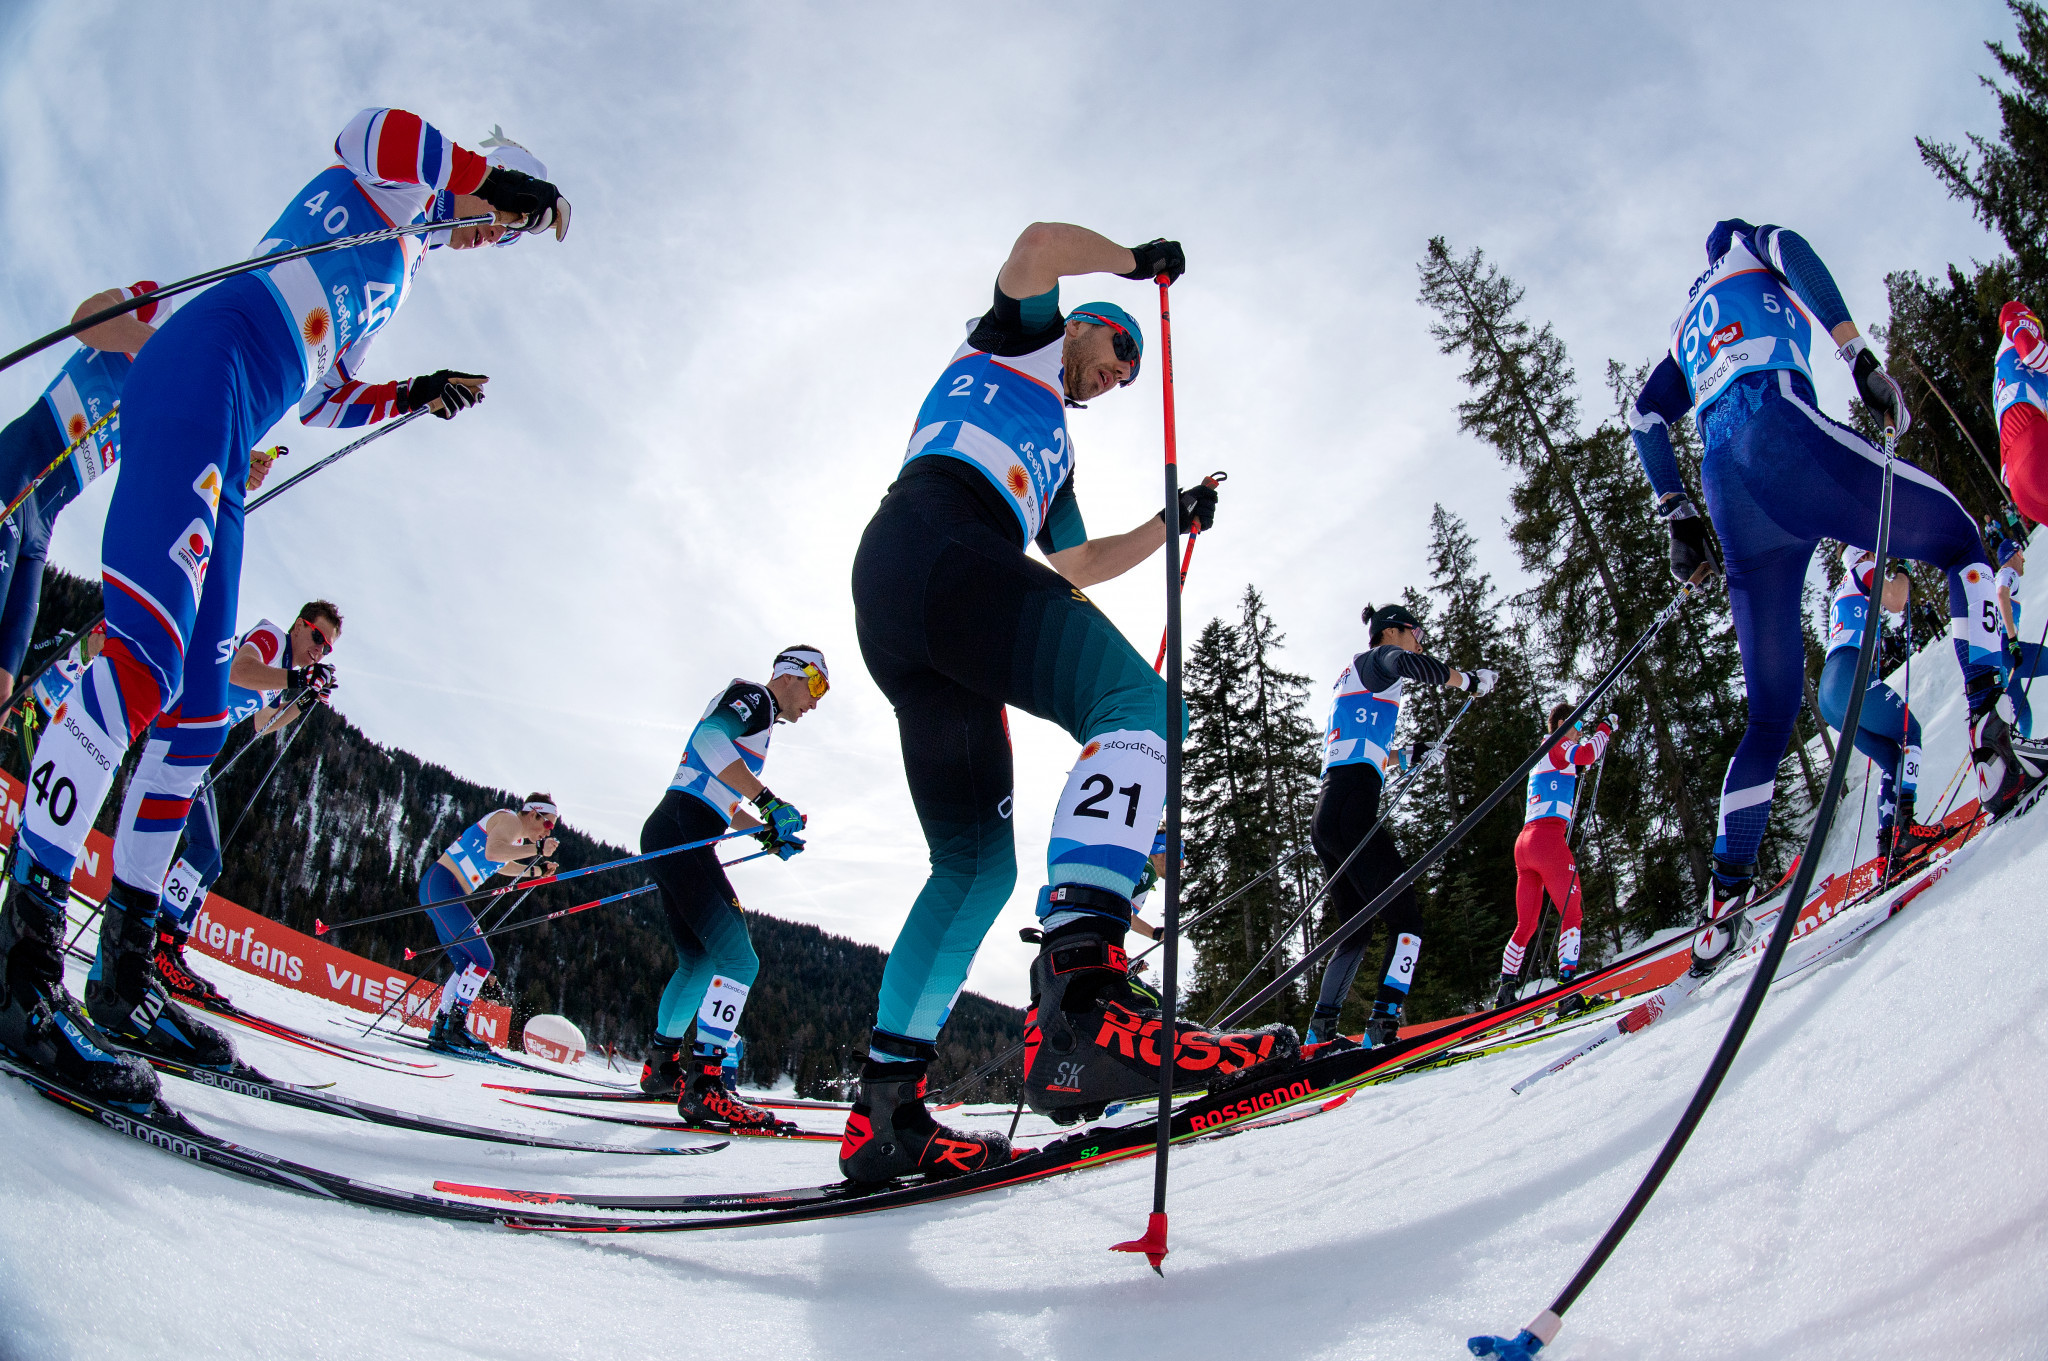 This year's edition of the FIS Nordic World Ski Championships was held in Seefeld in Austria ©Getty Images